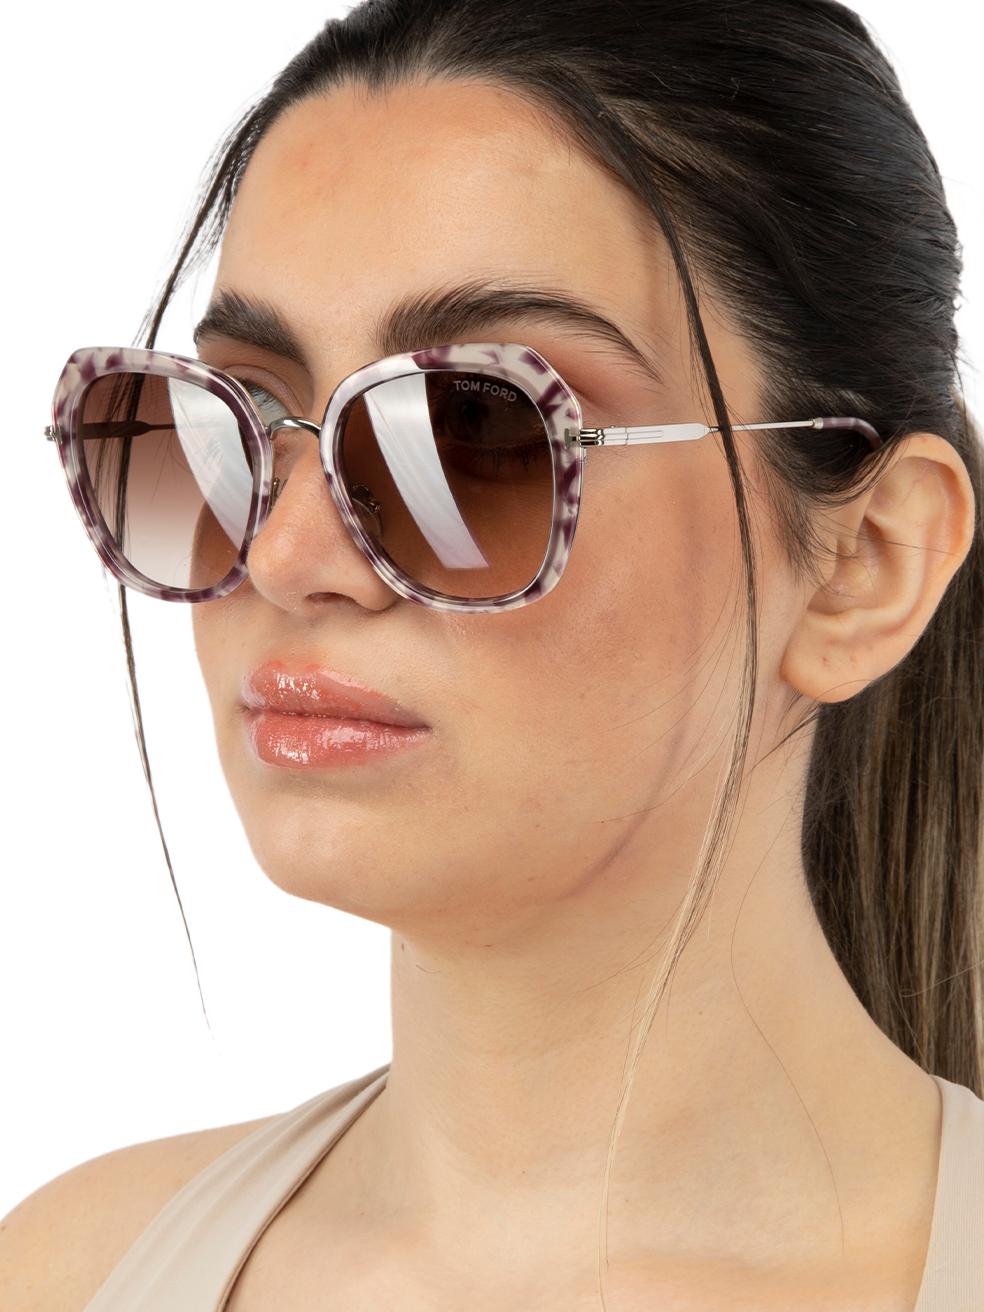 CONDITION is New with tagson this brand new Tom Ford designer item. This item comes with original packaging.
 
 
 
 Details
 
 
 Model: FT0792
 
 Coloured Havana
 
 Acetate
 
 Sunglasses
 
 Butterfly Frames
 
 Brown Gradient Lens
 
 Full-Rim
 
 
 
